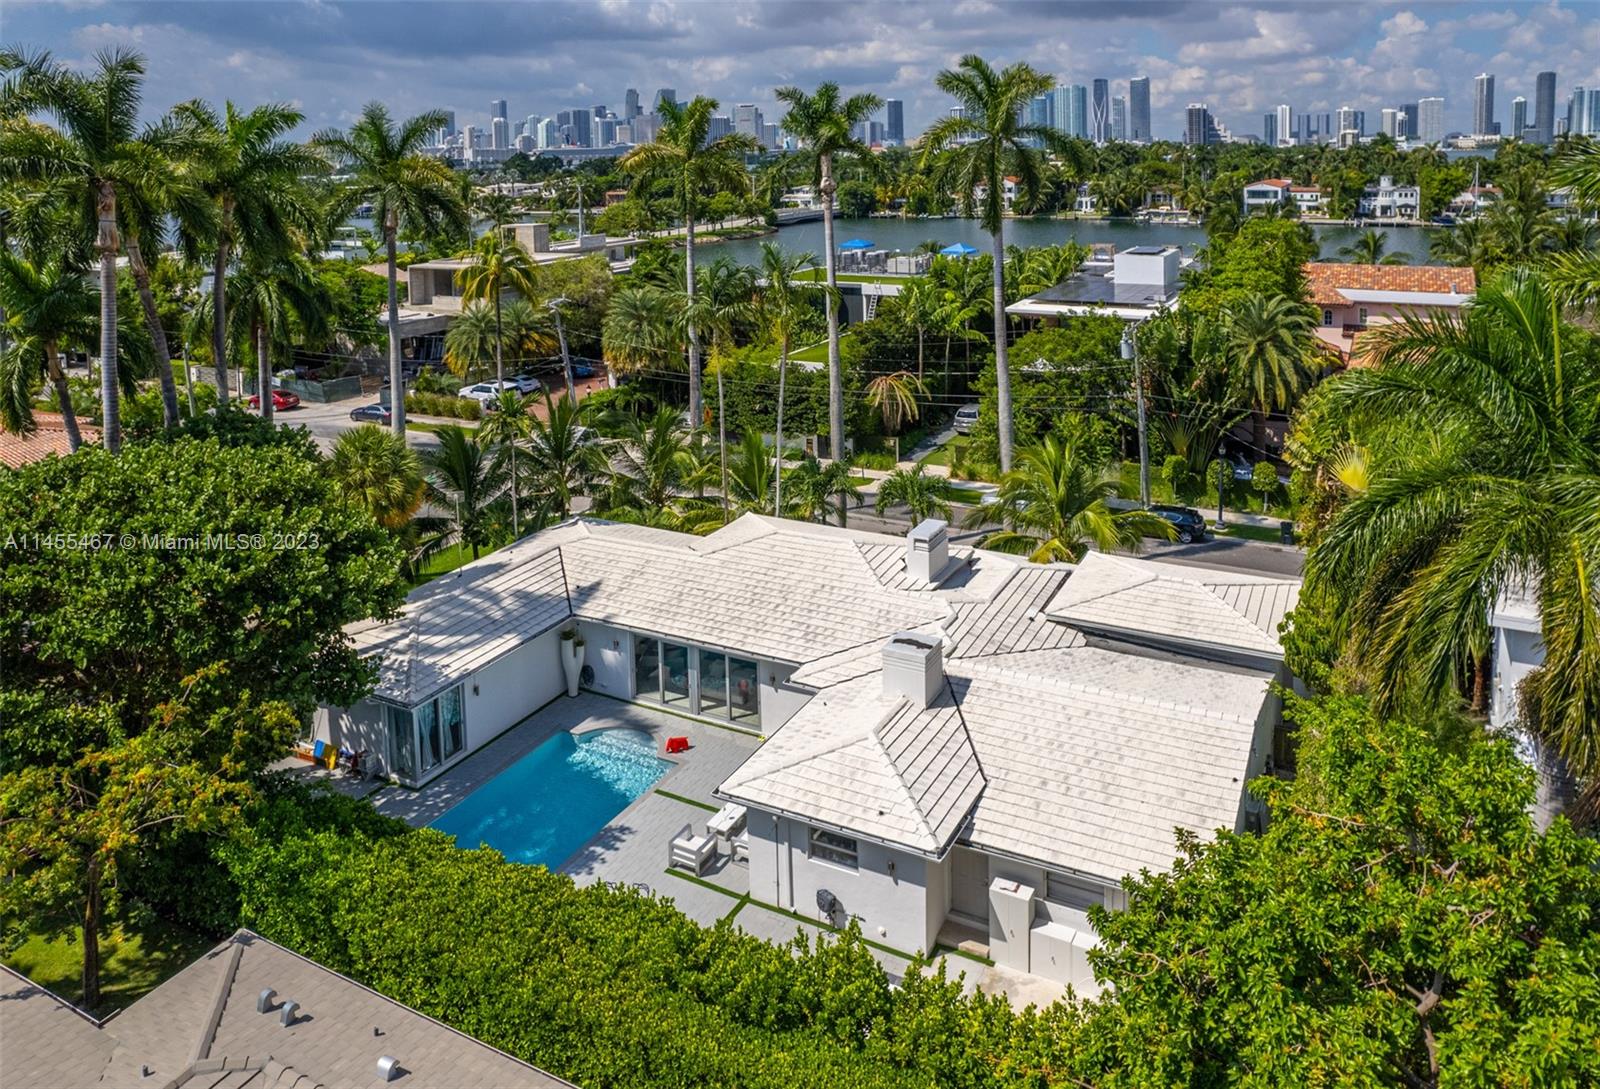 Welcome to this exceptional 4-bed, 4-bath, 3,800 sqft single-family home on an expansive 11,250 sqft corner lot, a rare find in Miami Beach's Venetian Islands. 
The house boasts a high-end, brand-new kitchen that bathes the space in natural light, creating a warm and inviting atmosphere. For your security, there's a comprehensive alarm system in place.

The open-concept living areas seamlessly lead to a pool and barbecue area, perfect for outdoor entertaining. The 500 sqft gym/exercise room is versatile, easily converted into a movie theater, or even back into a car garage.

Located on prestigious Dilido island, the substantial lot size holds potential for future development.